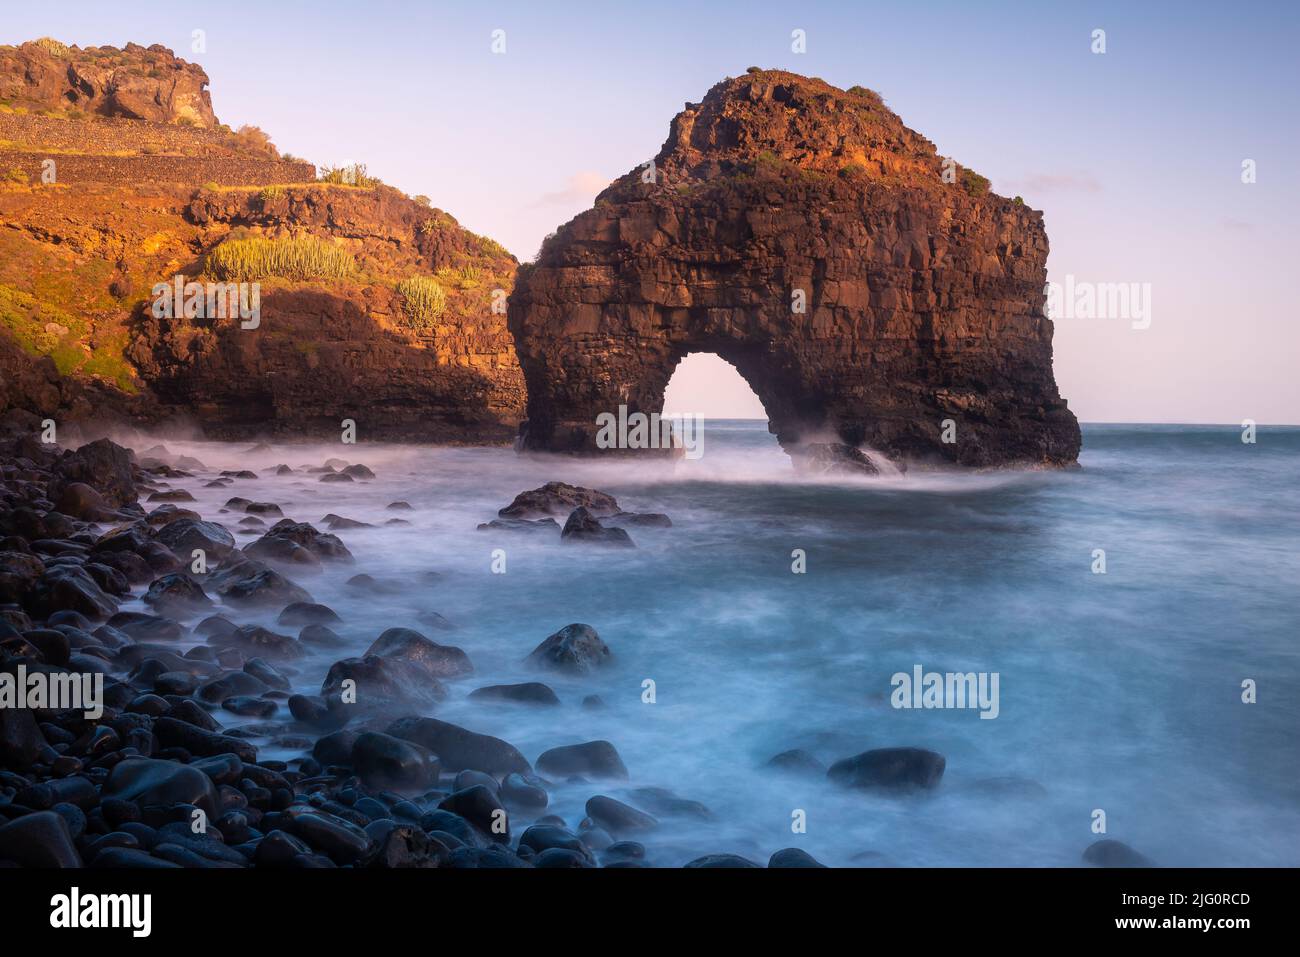 Arch of Los Roques beach, Tenerife island, Spain Stock Photo